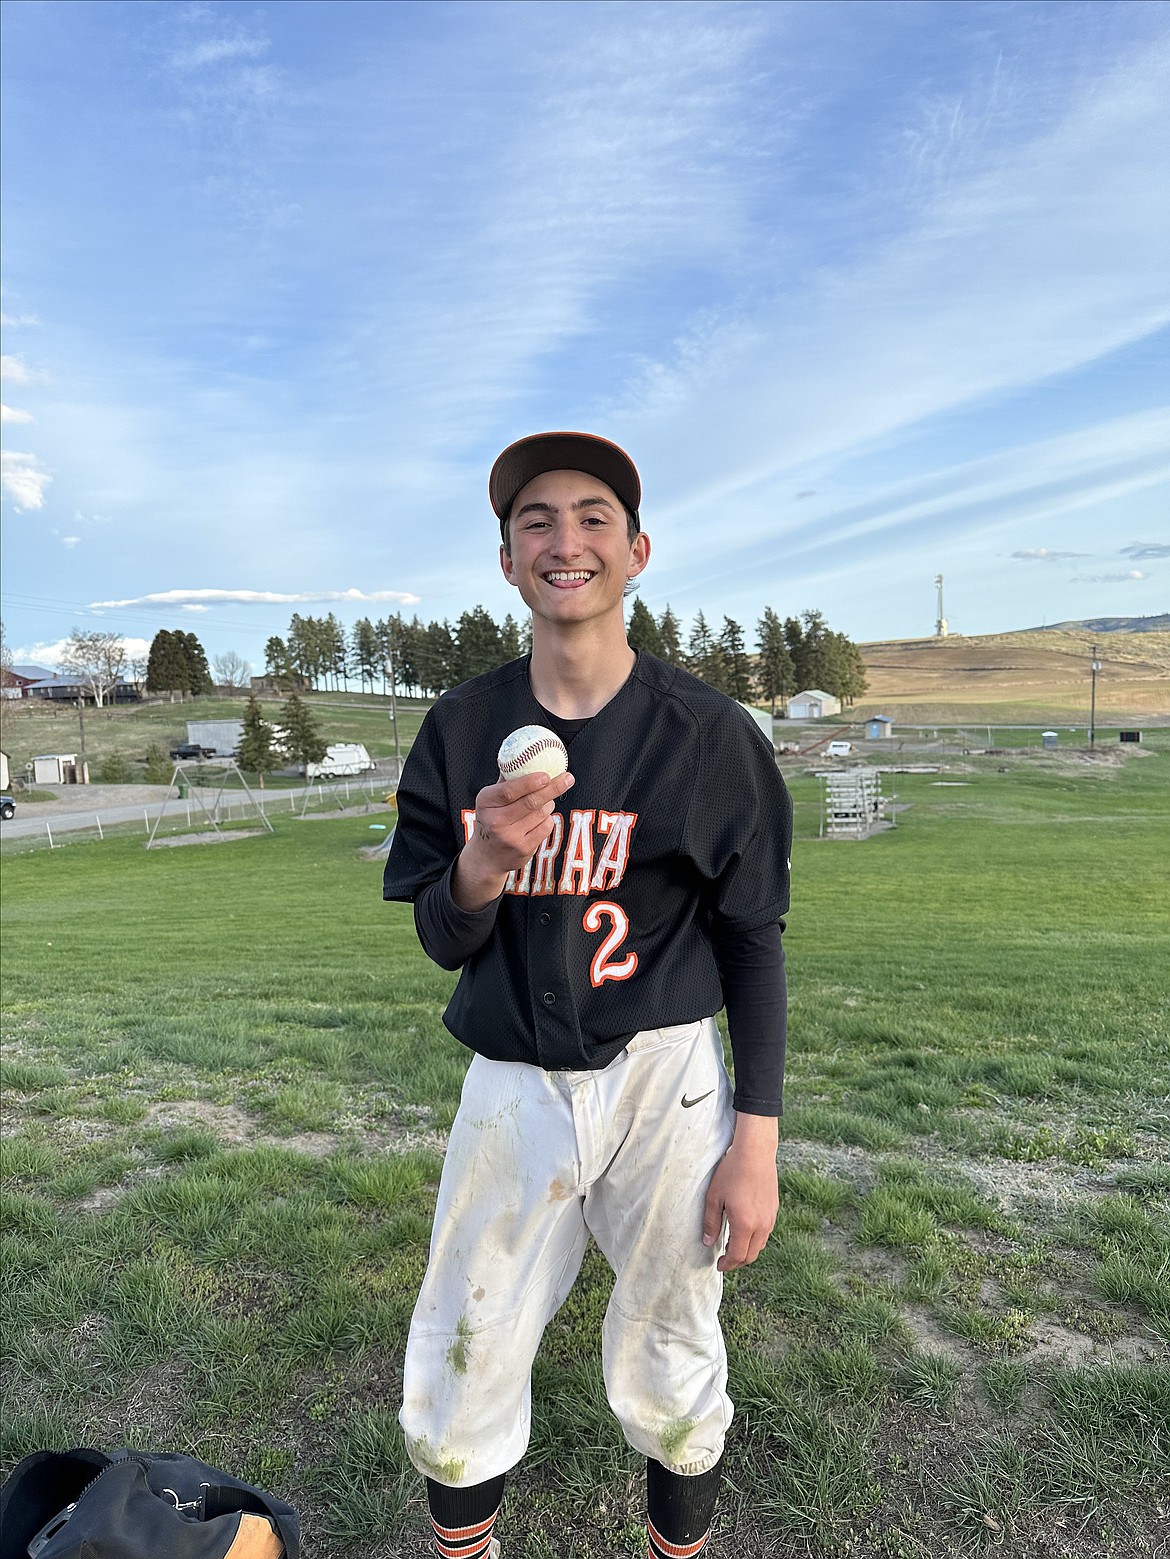 Jett Johson made the Ephrata Tigers athletic program proud on a regular basis with his hard work and dedication. During his freshman year, he was the first on the team to knock a home run ball over the fence in a match against Waterville. Baseball was his absolute favorite sport.